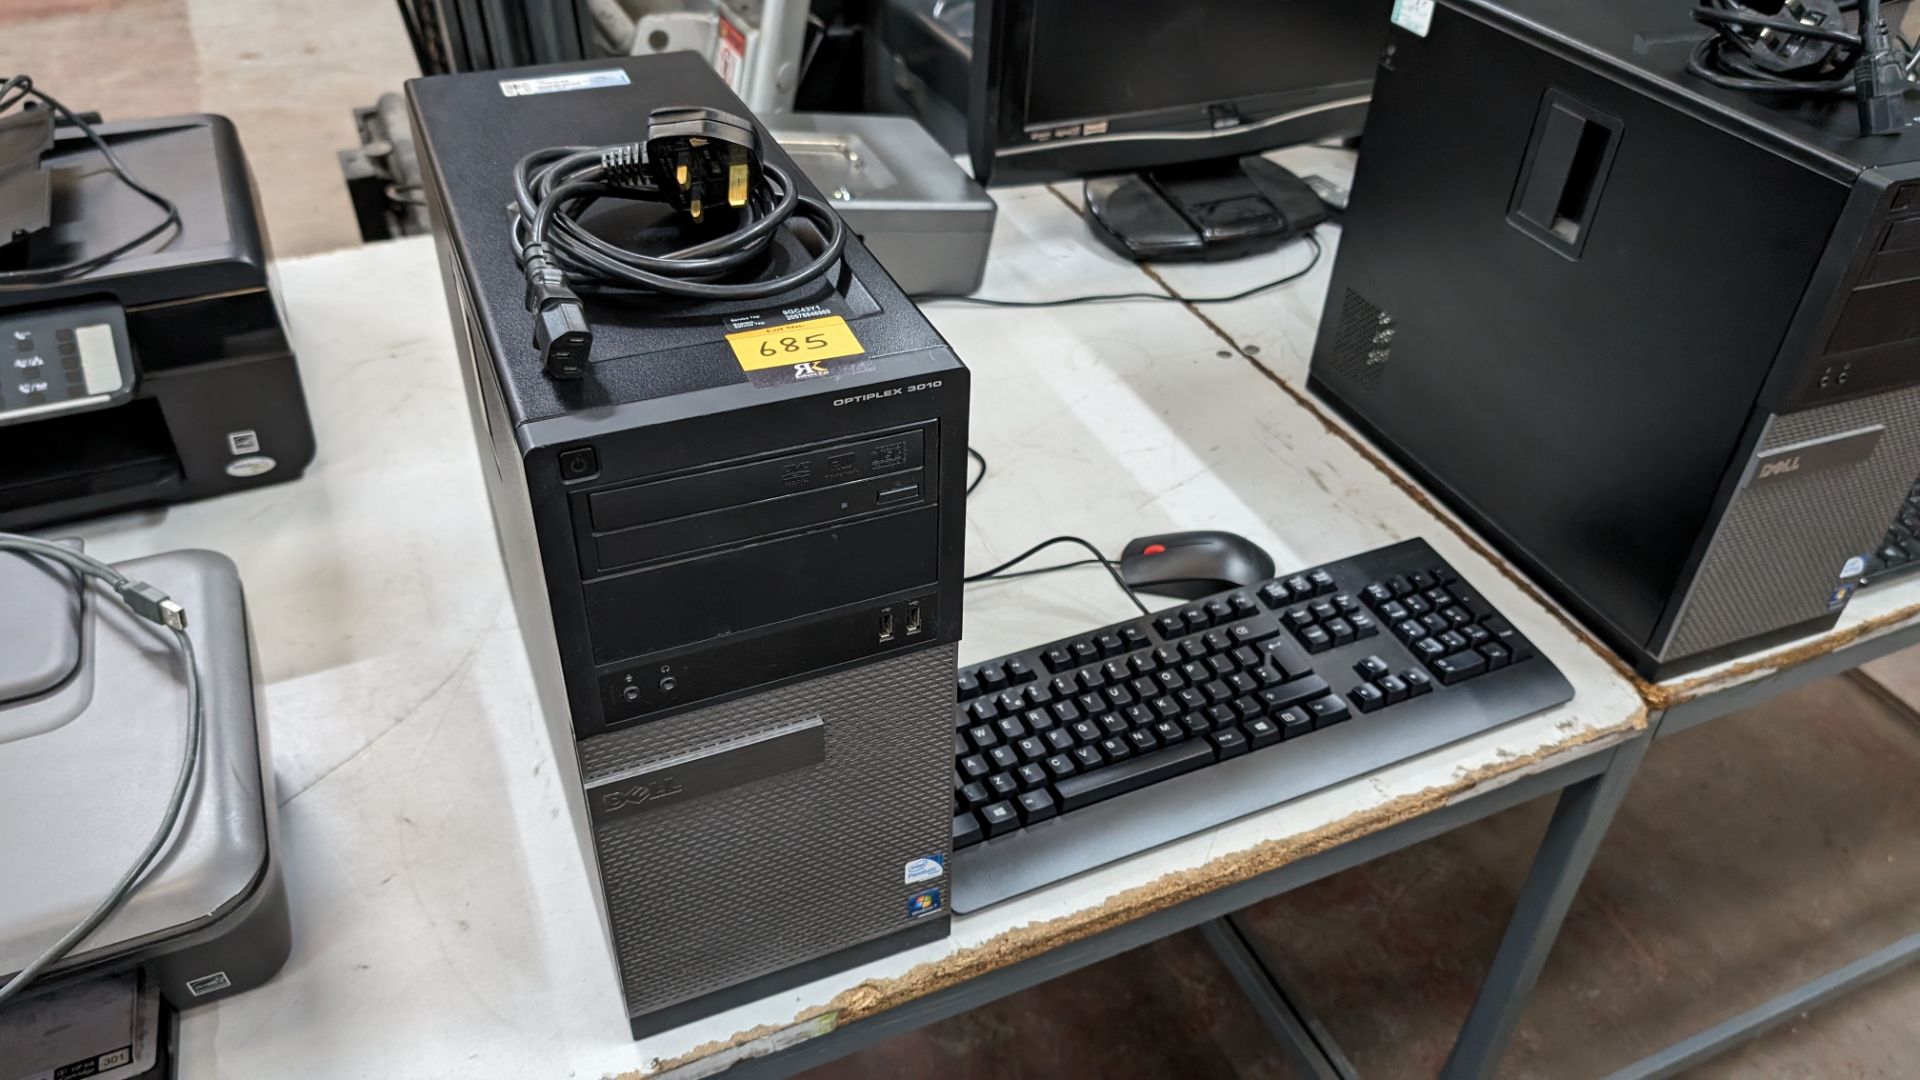 3 off desktop computers each including keyboard and mouse - Bild 5 aus 10